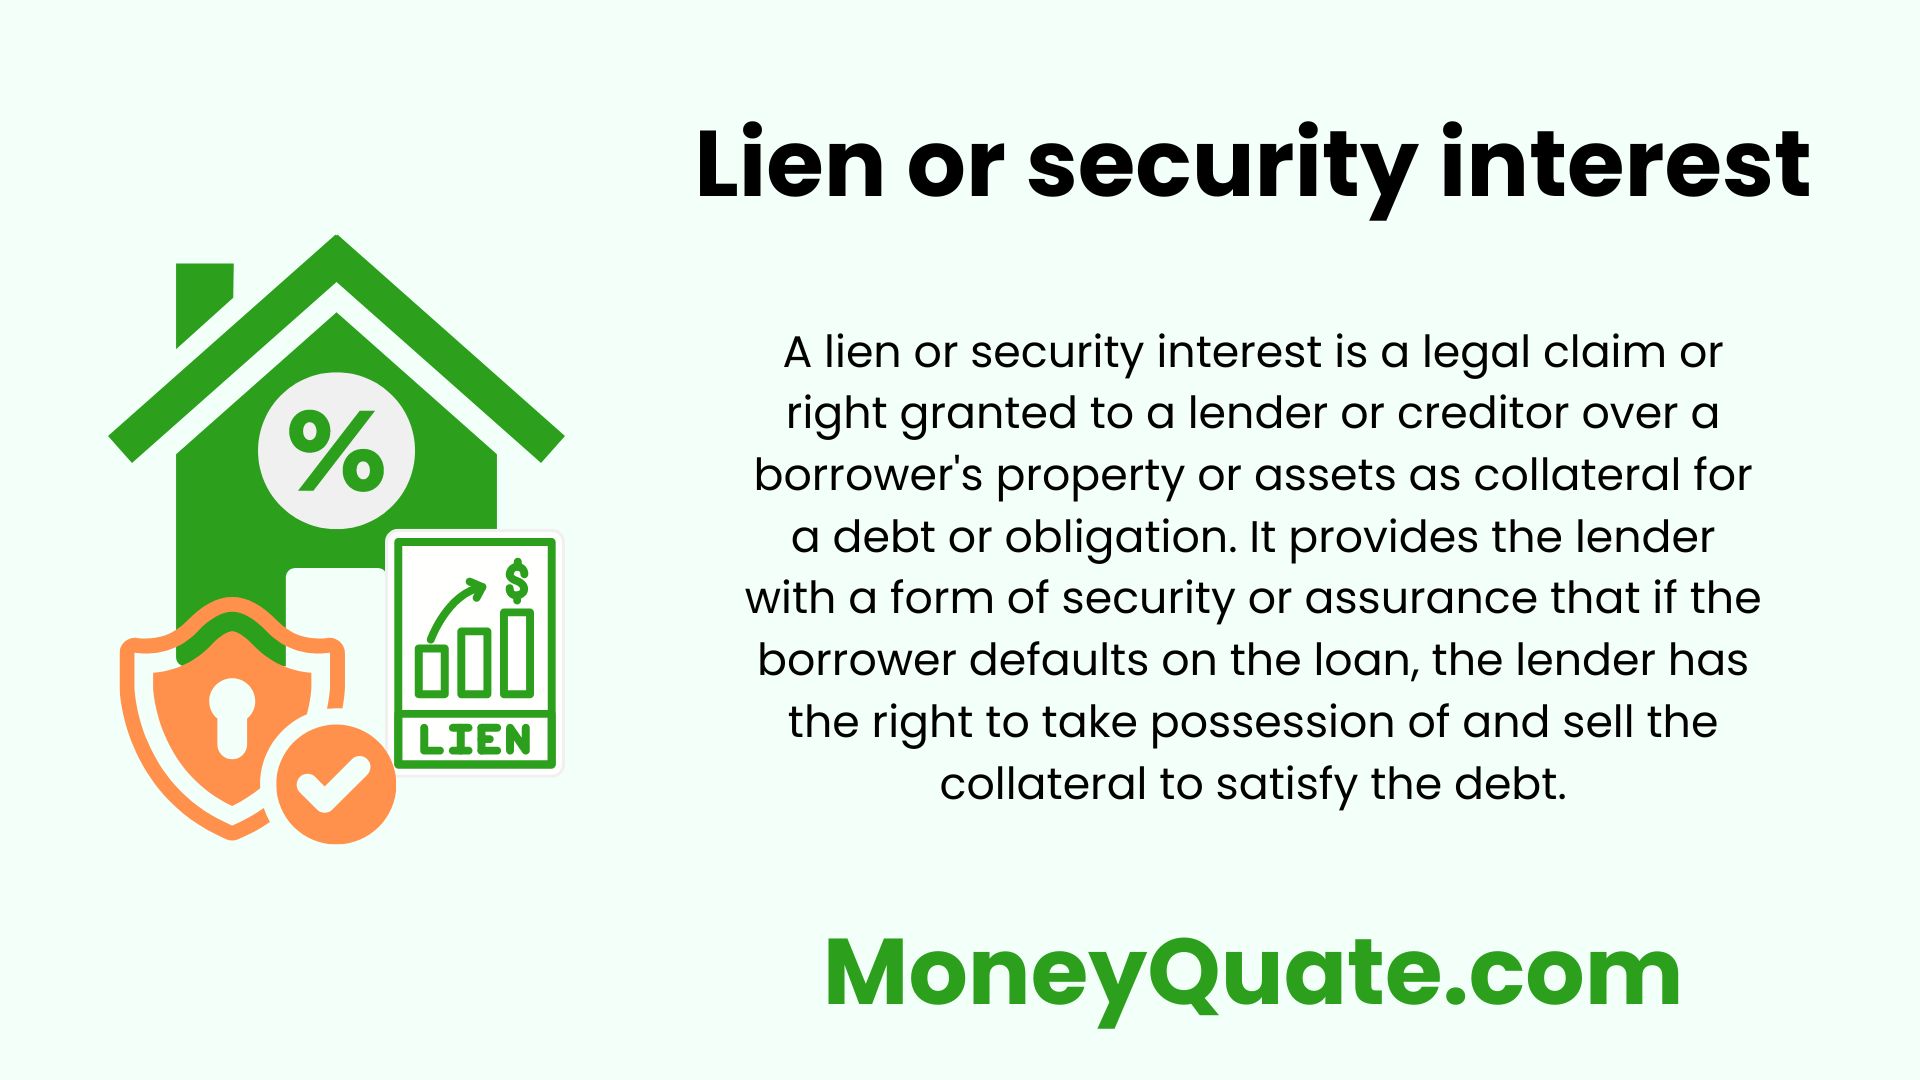 Liens or security interests